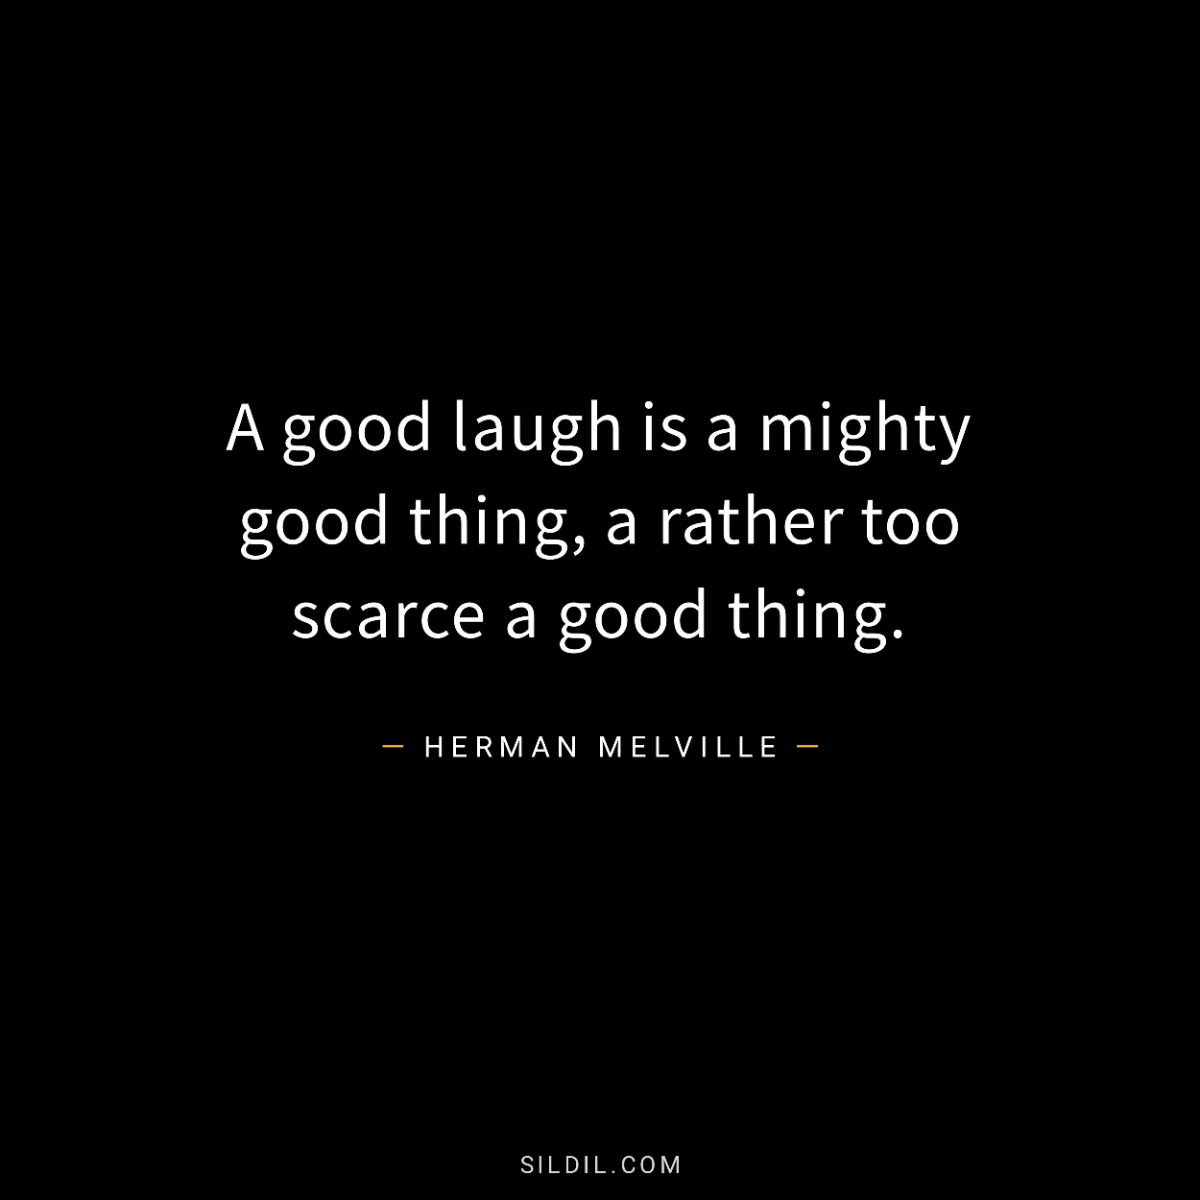 A good laugh is a mighty good thing, a rather too scarce a good thing.